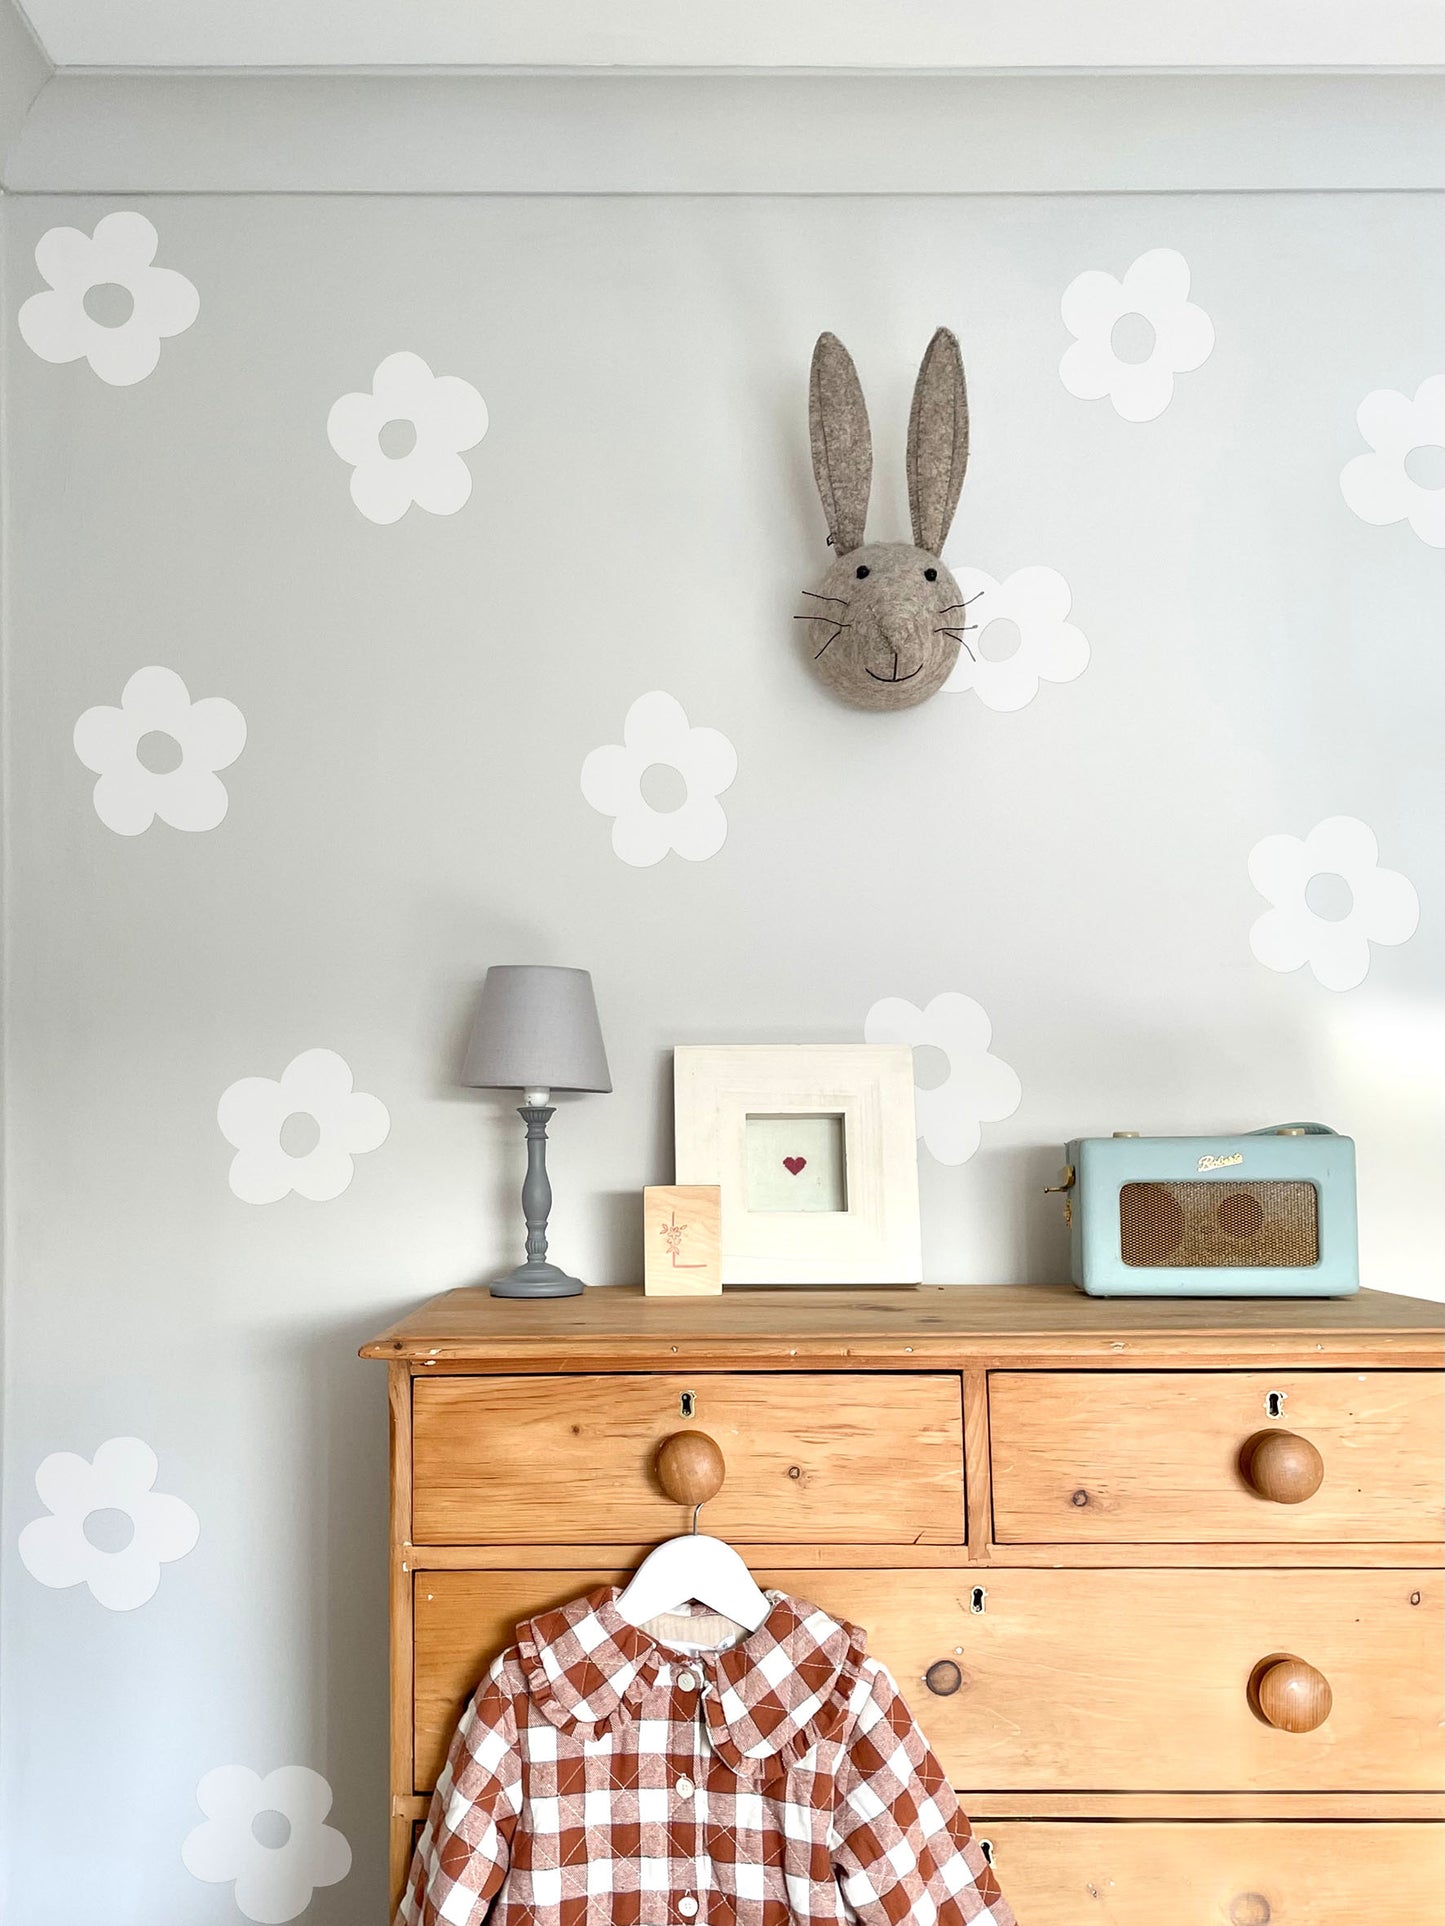 White Flower Wall Stickers | Eco-Friendly, Removable, Reusable, Fabric Wall Stickers